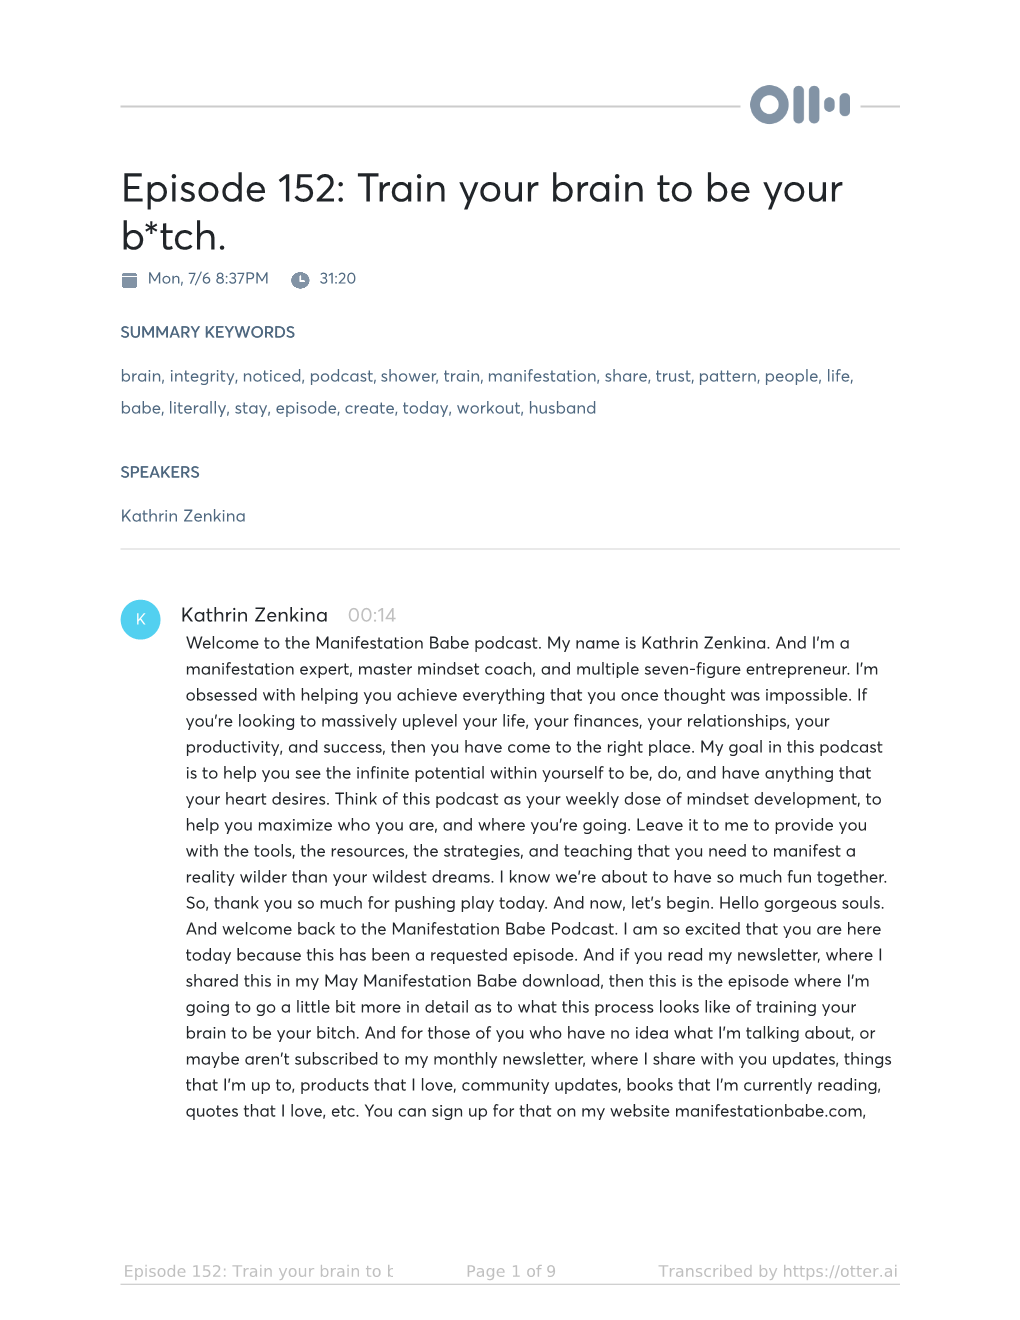 Episode 152: Train Your Brain to Be Your B*Tch. Mon, 7/6 8:37PM 31:20